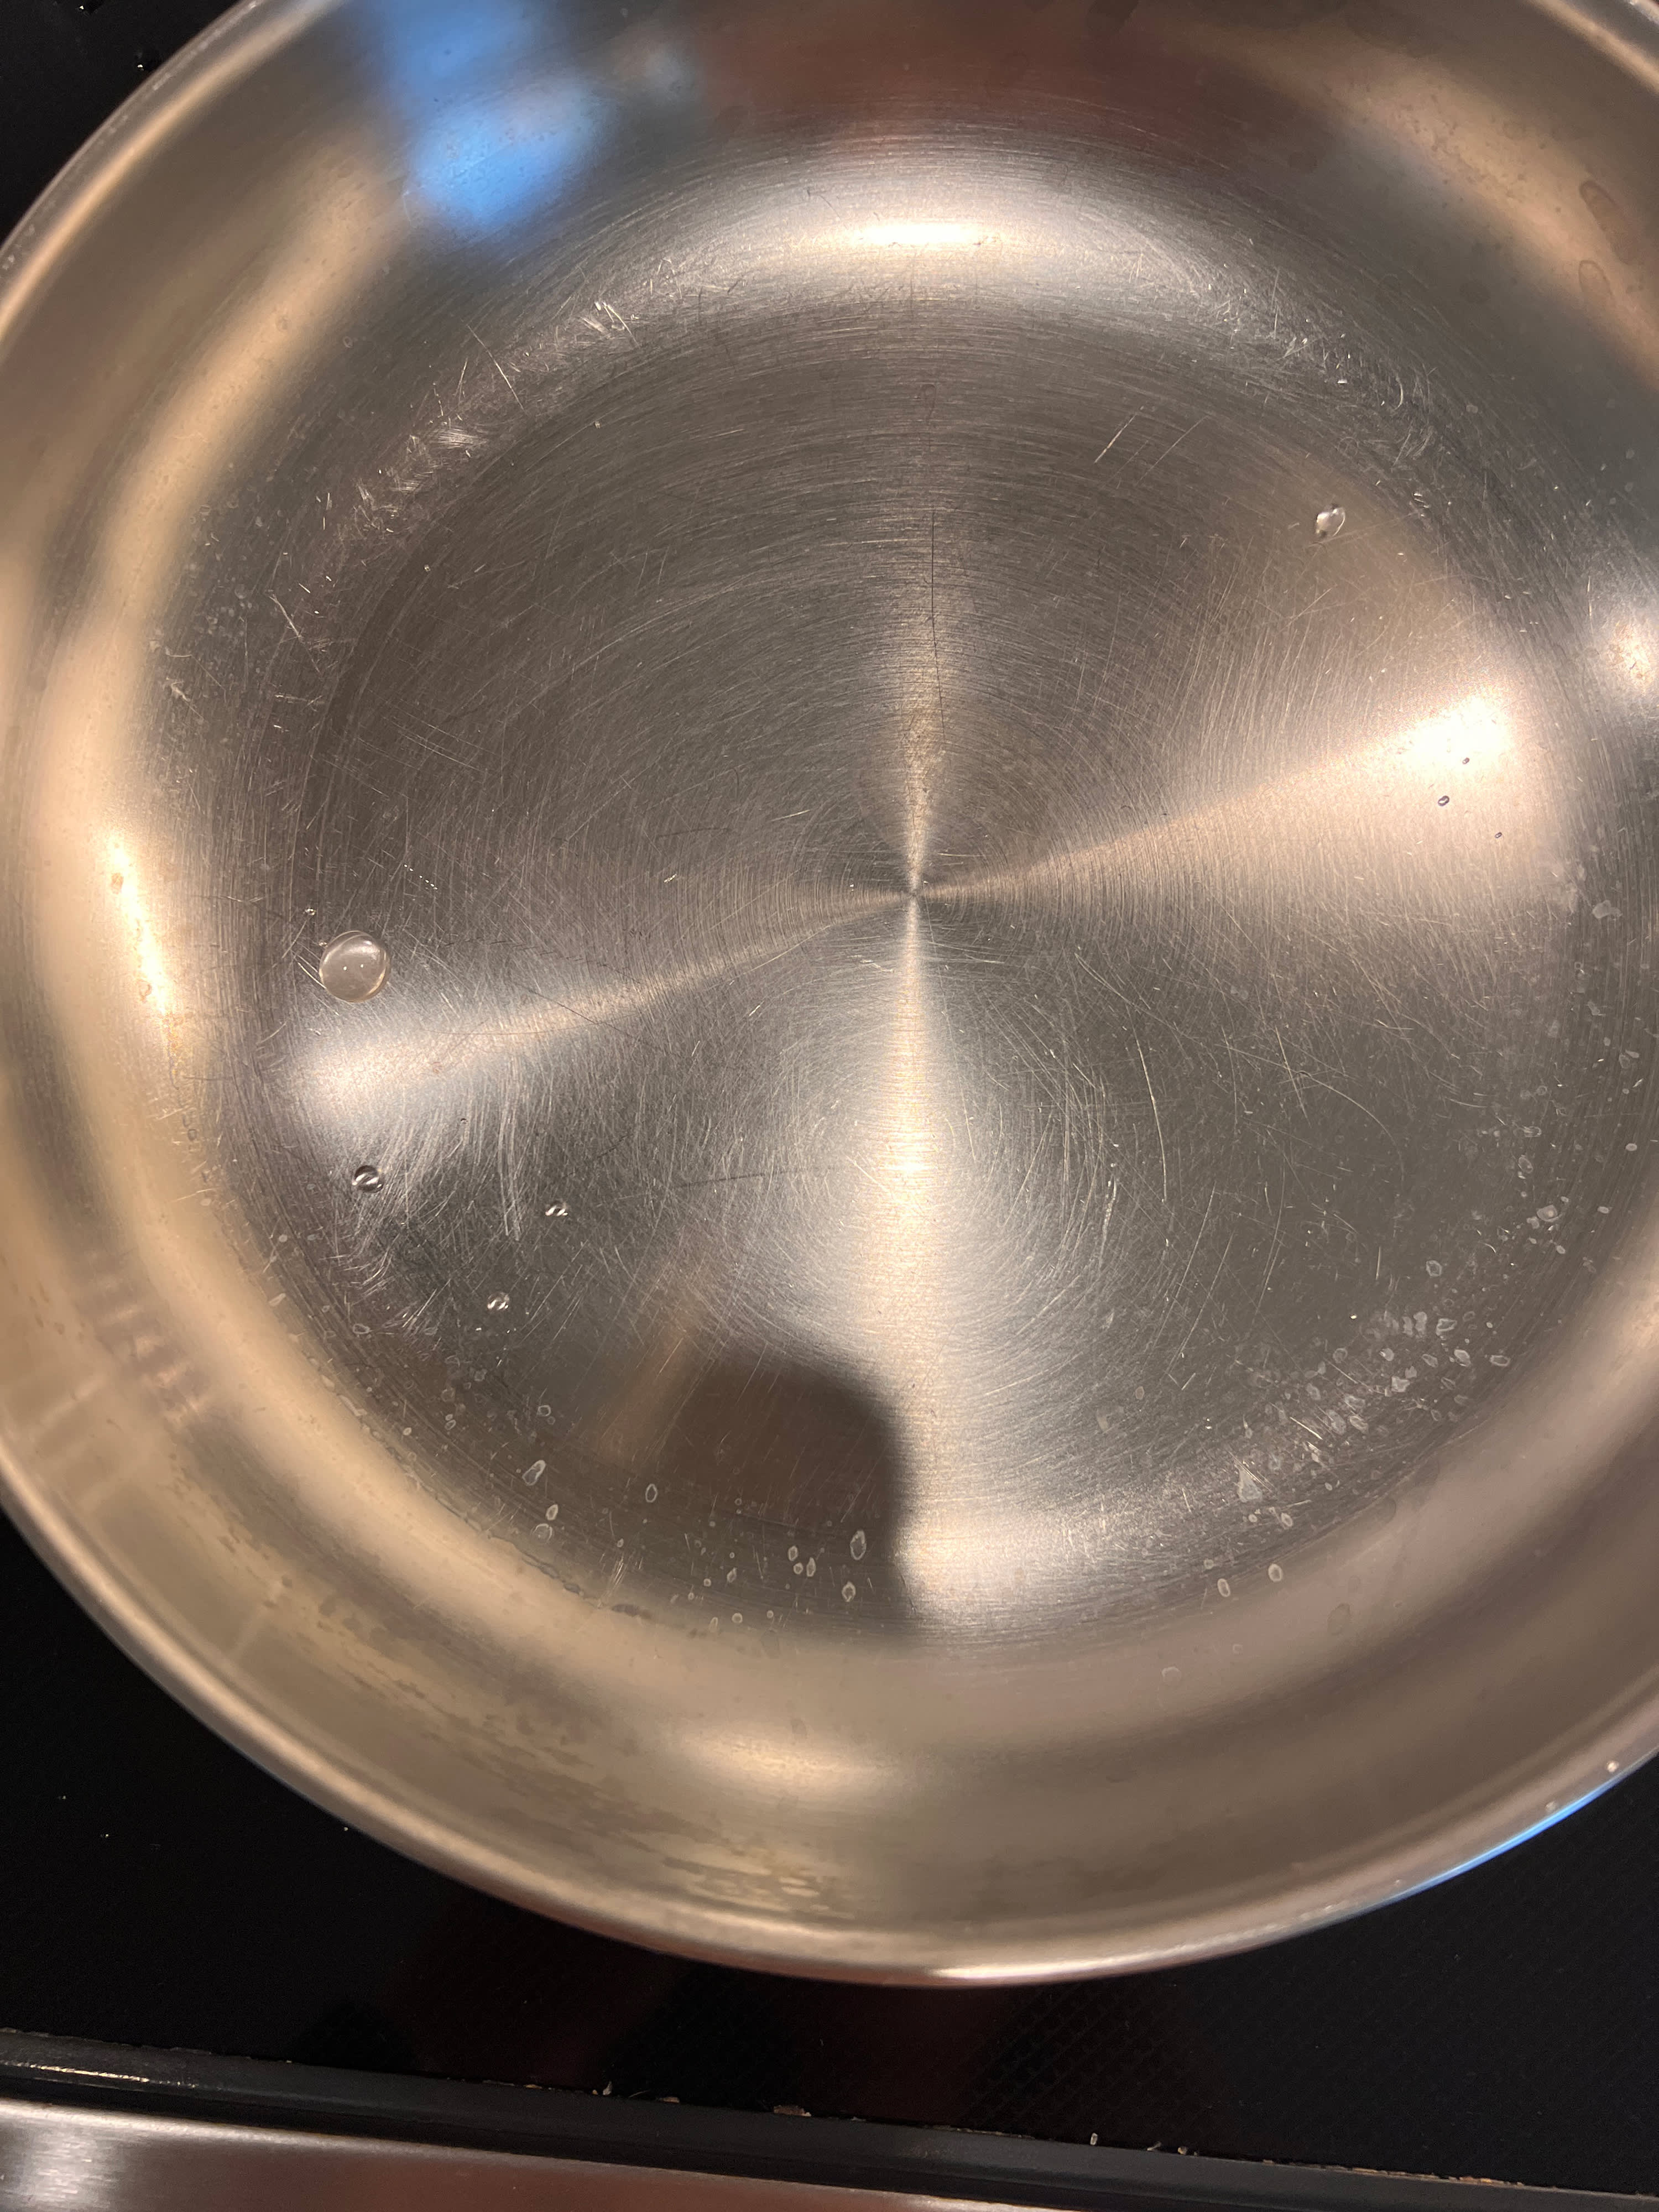 https://cdn.apartmenttherapy.info/image/upload/v1681329379/k/Edit/2023-04-hack-makes-all-your-stainless-steel-pans-nonstick/nonstick-stainless-steel-hack-1841.jpg